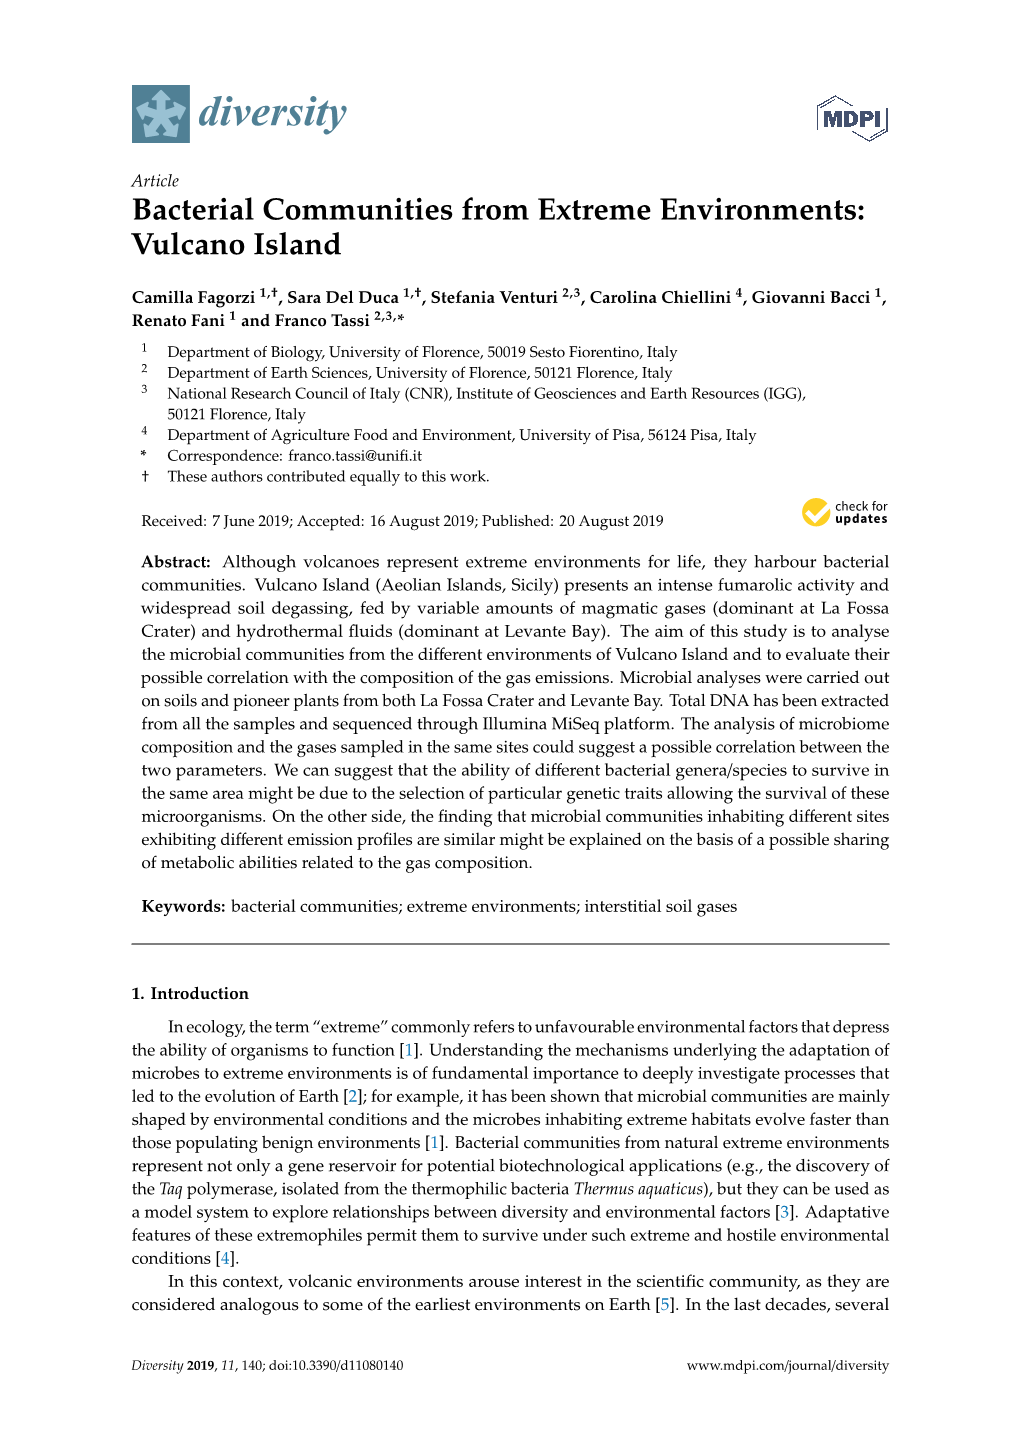 Bacterial Communities from Extreme Environments: Vulcano Island